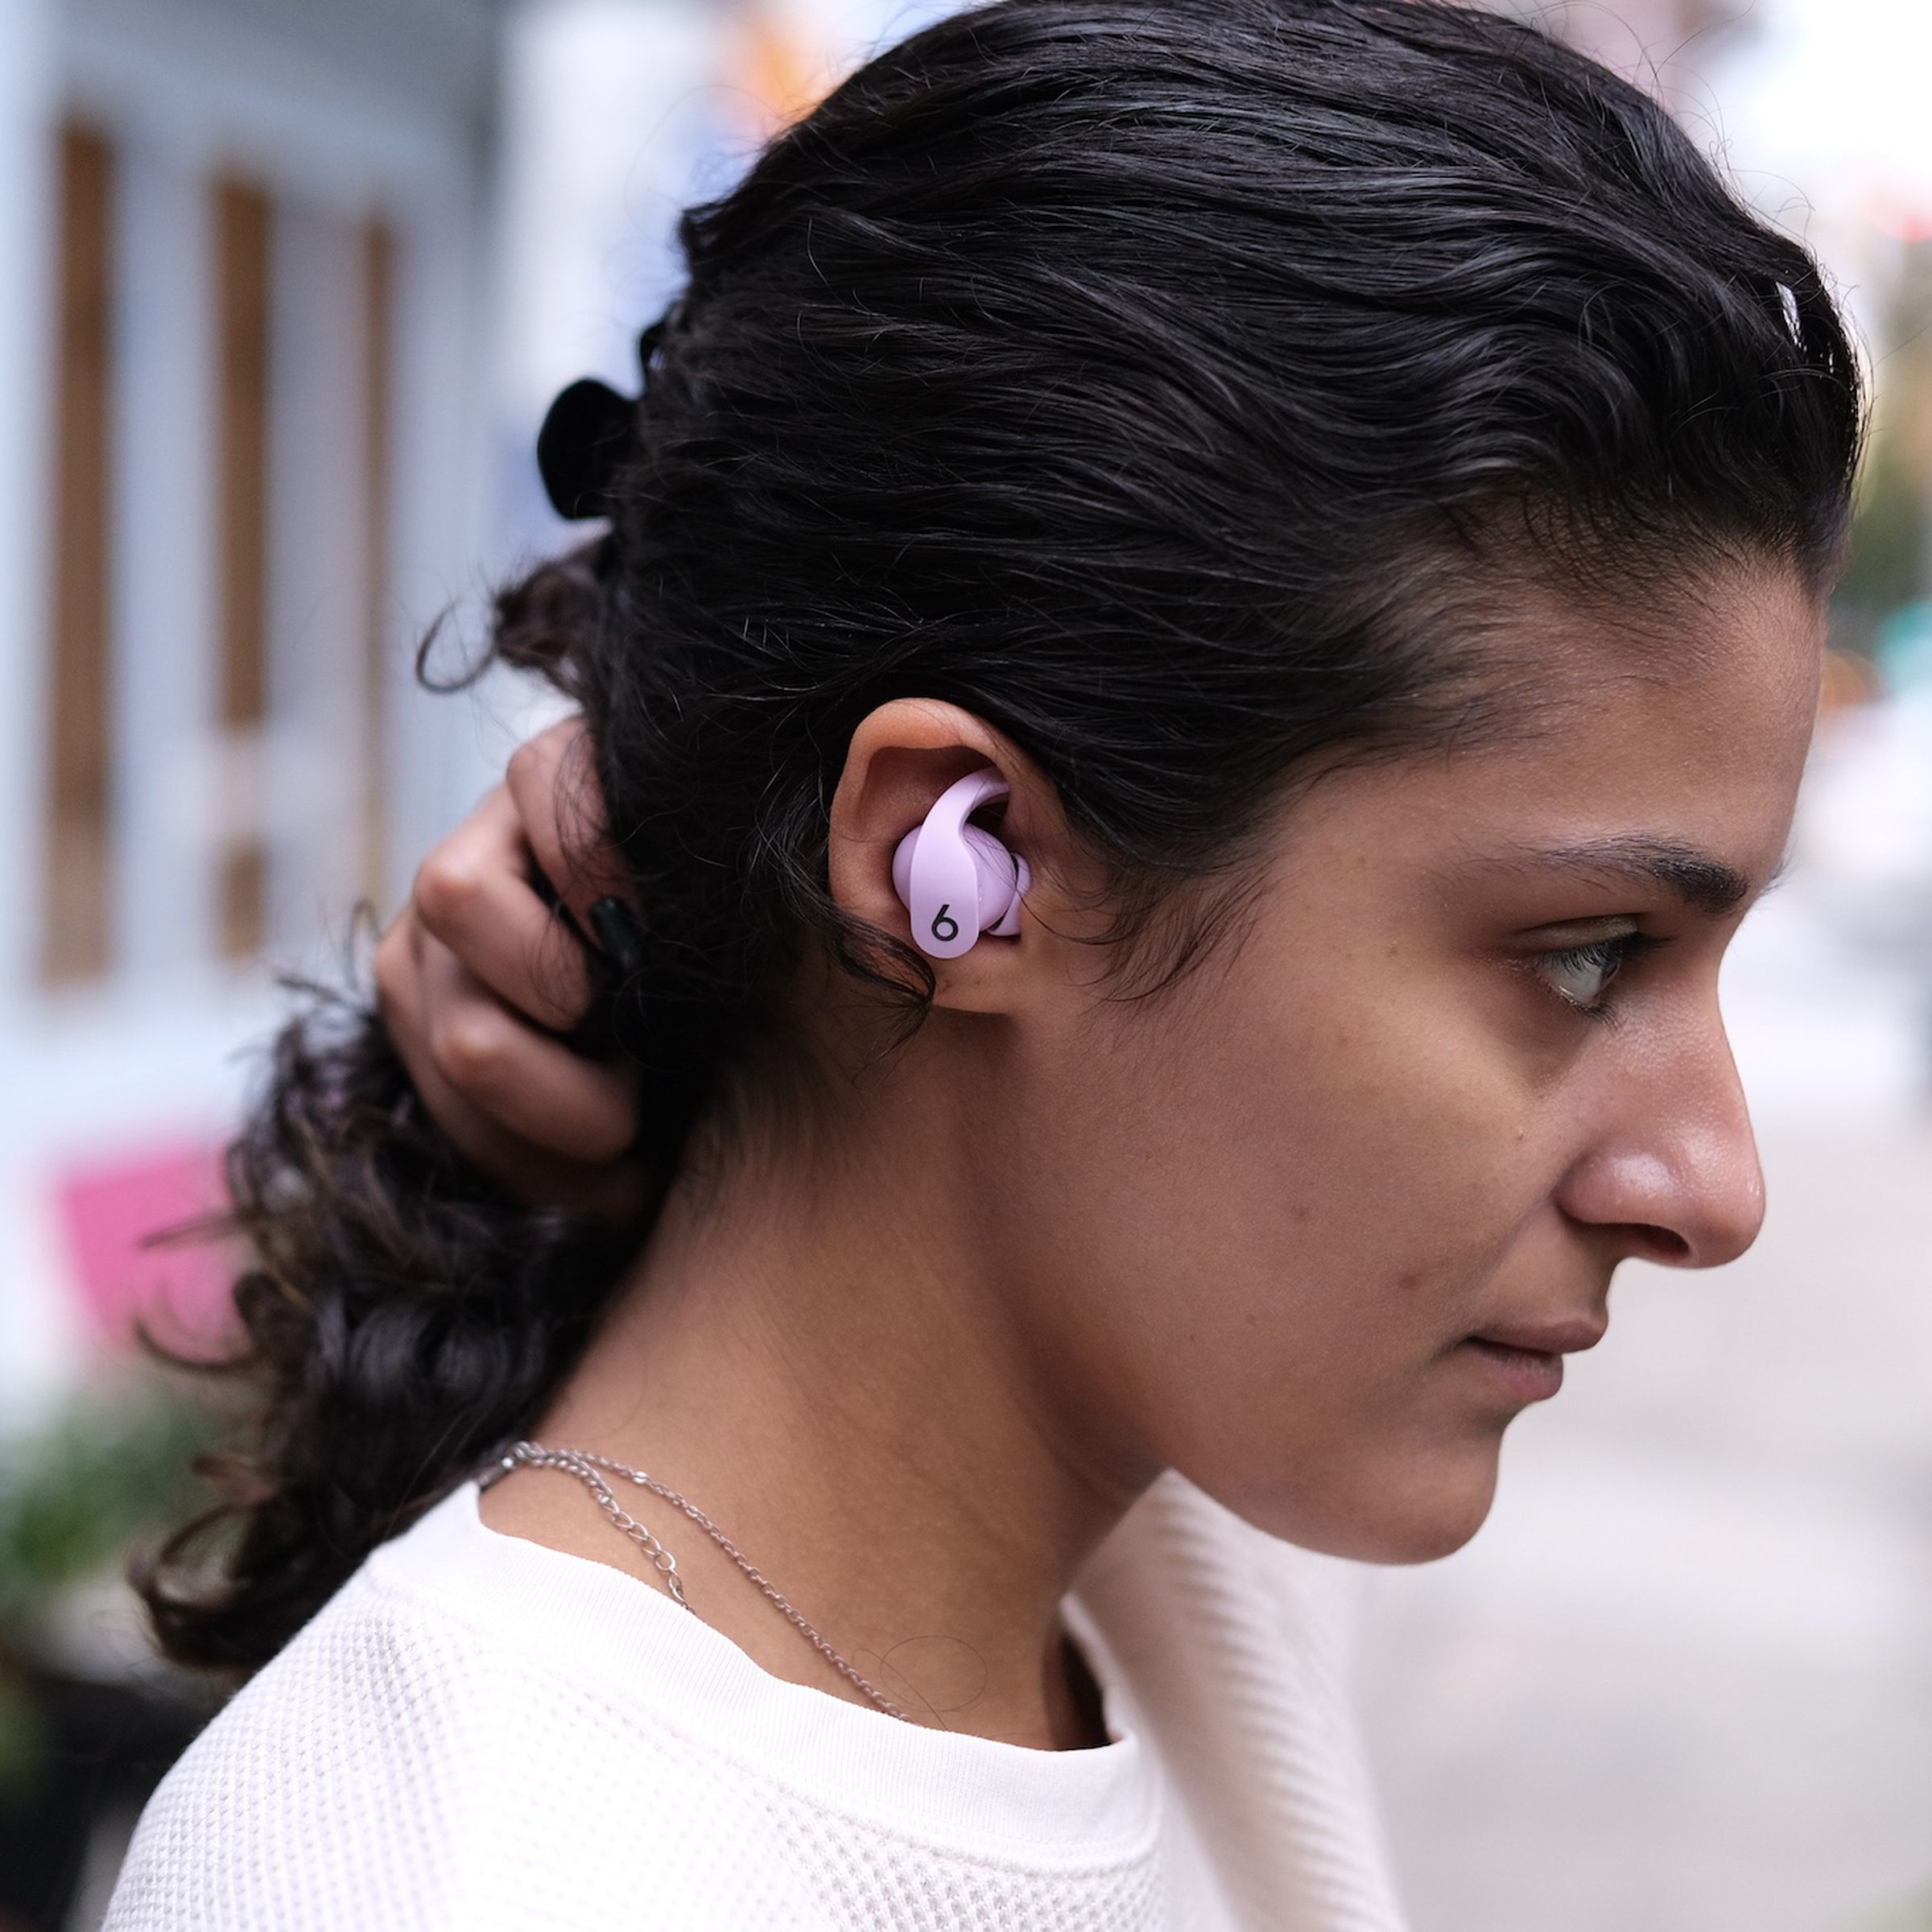 A side-profile image of the Beats Fit Pro earbuds pictured in a woman’s right ear.